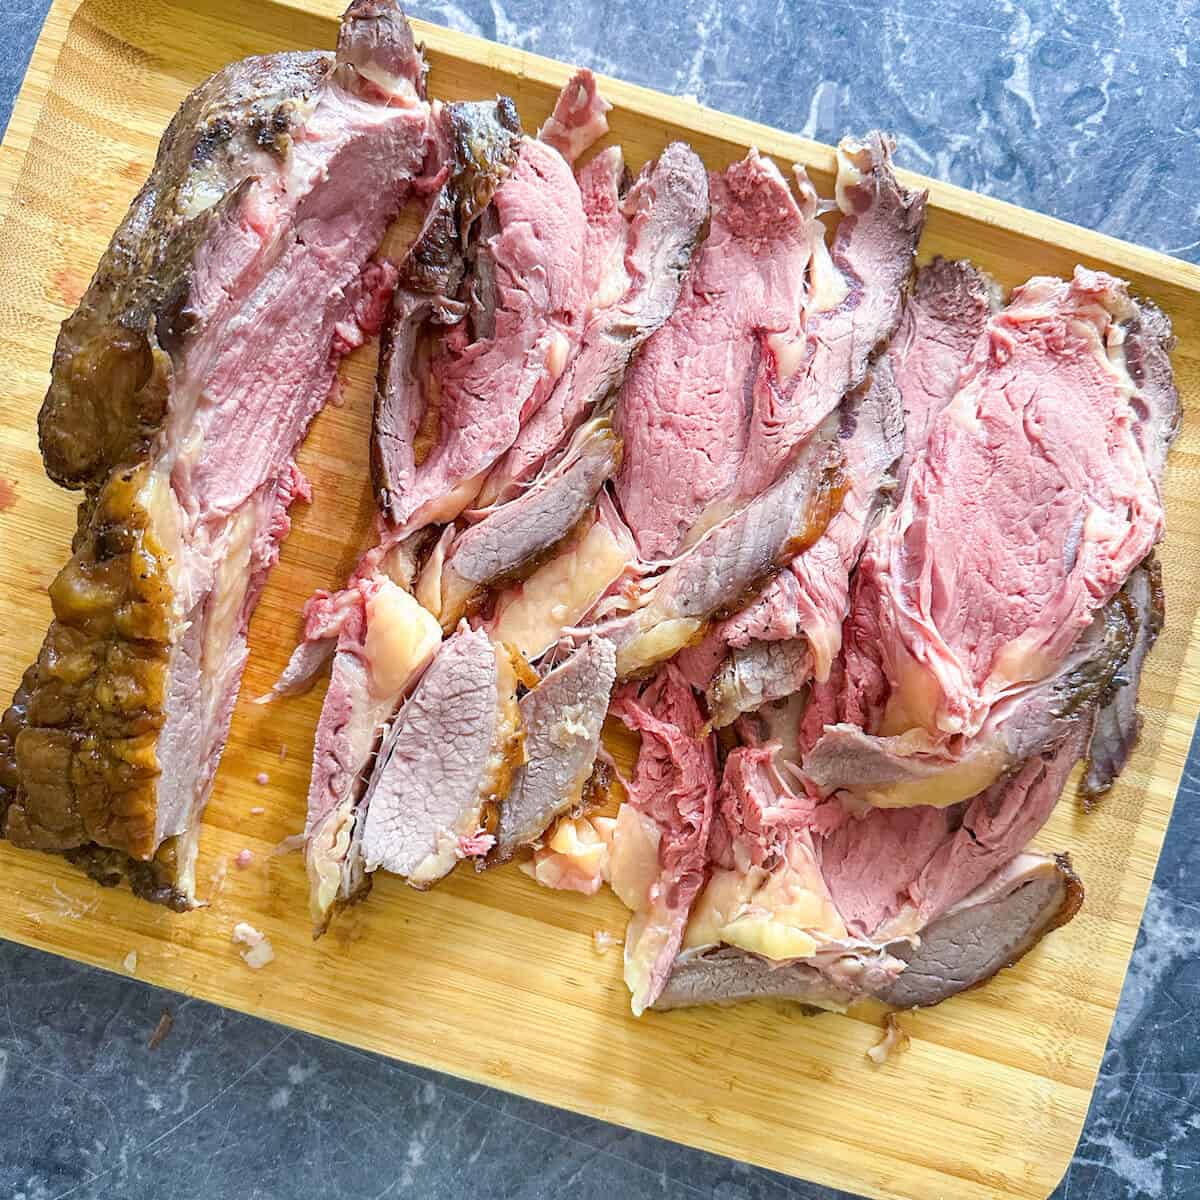 Carved standing rib roast on a wooden carving board.